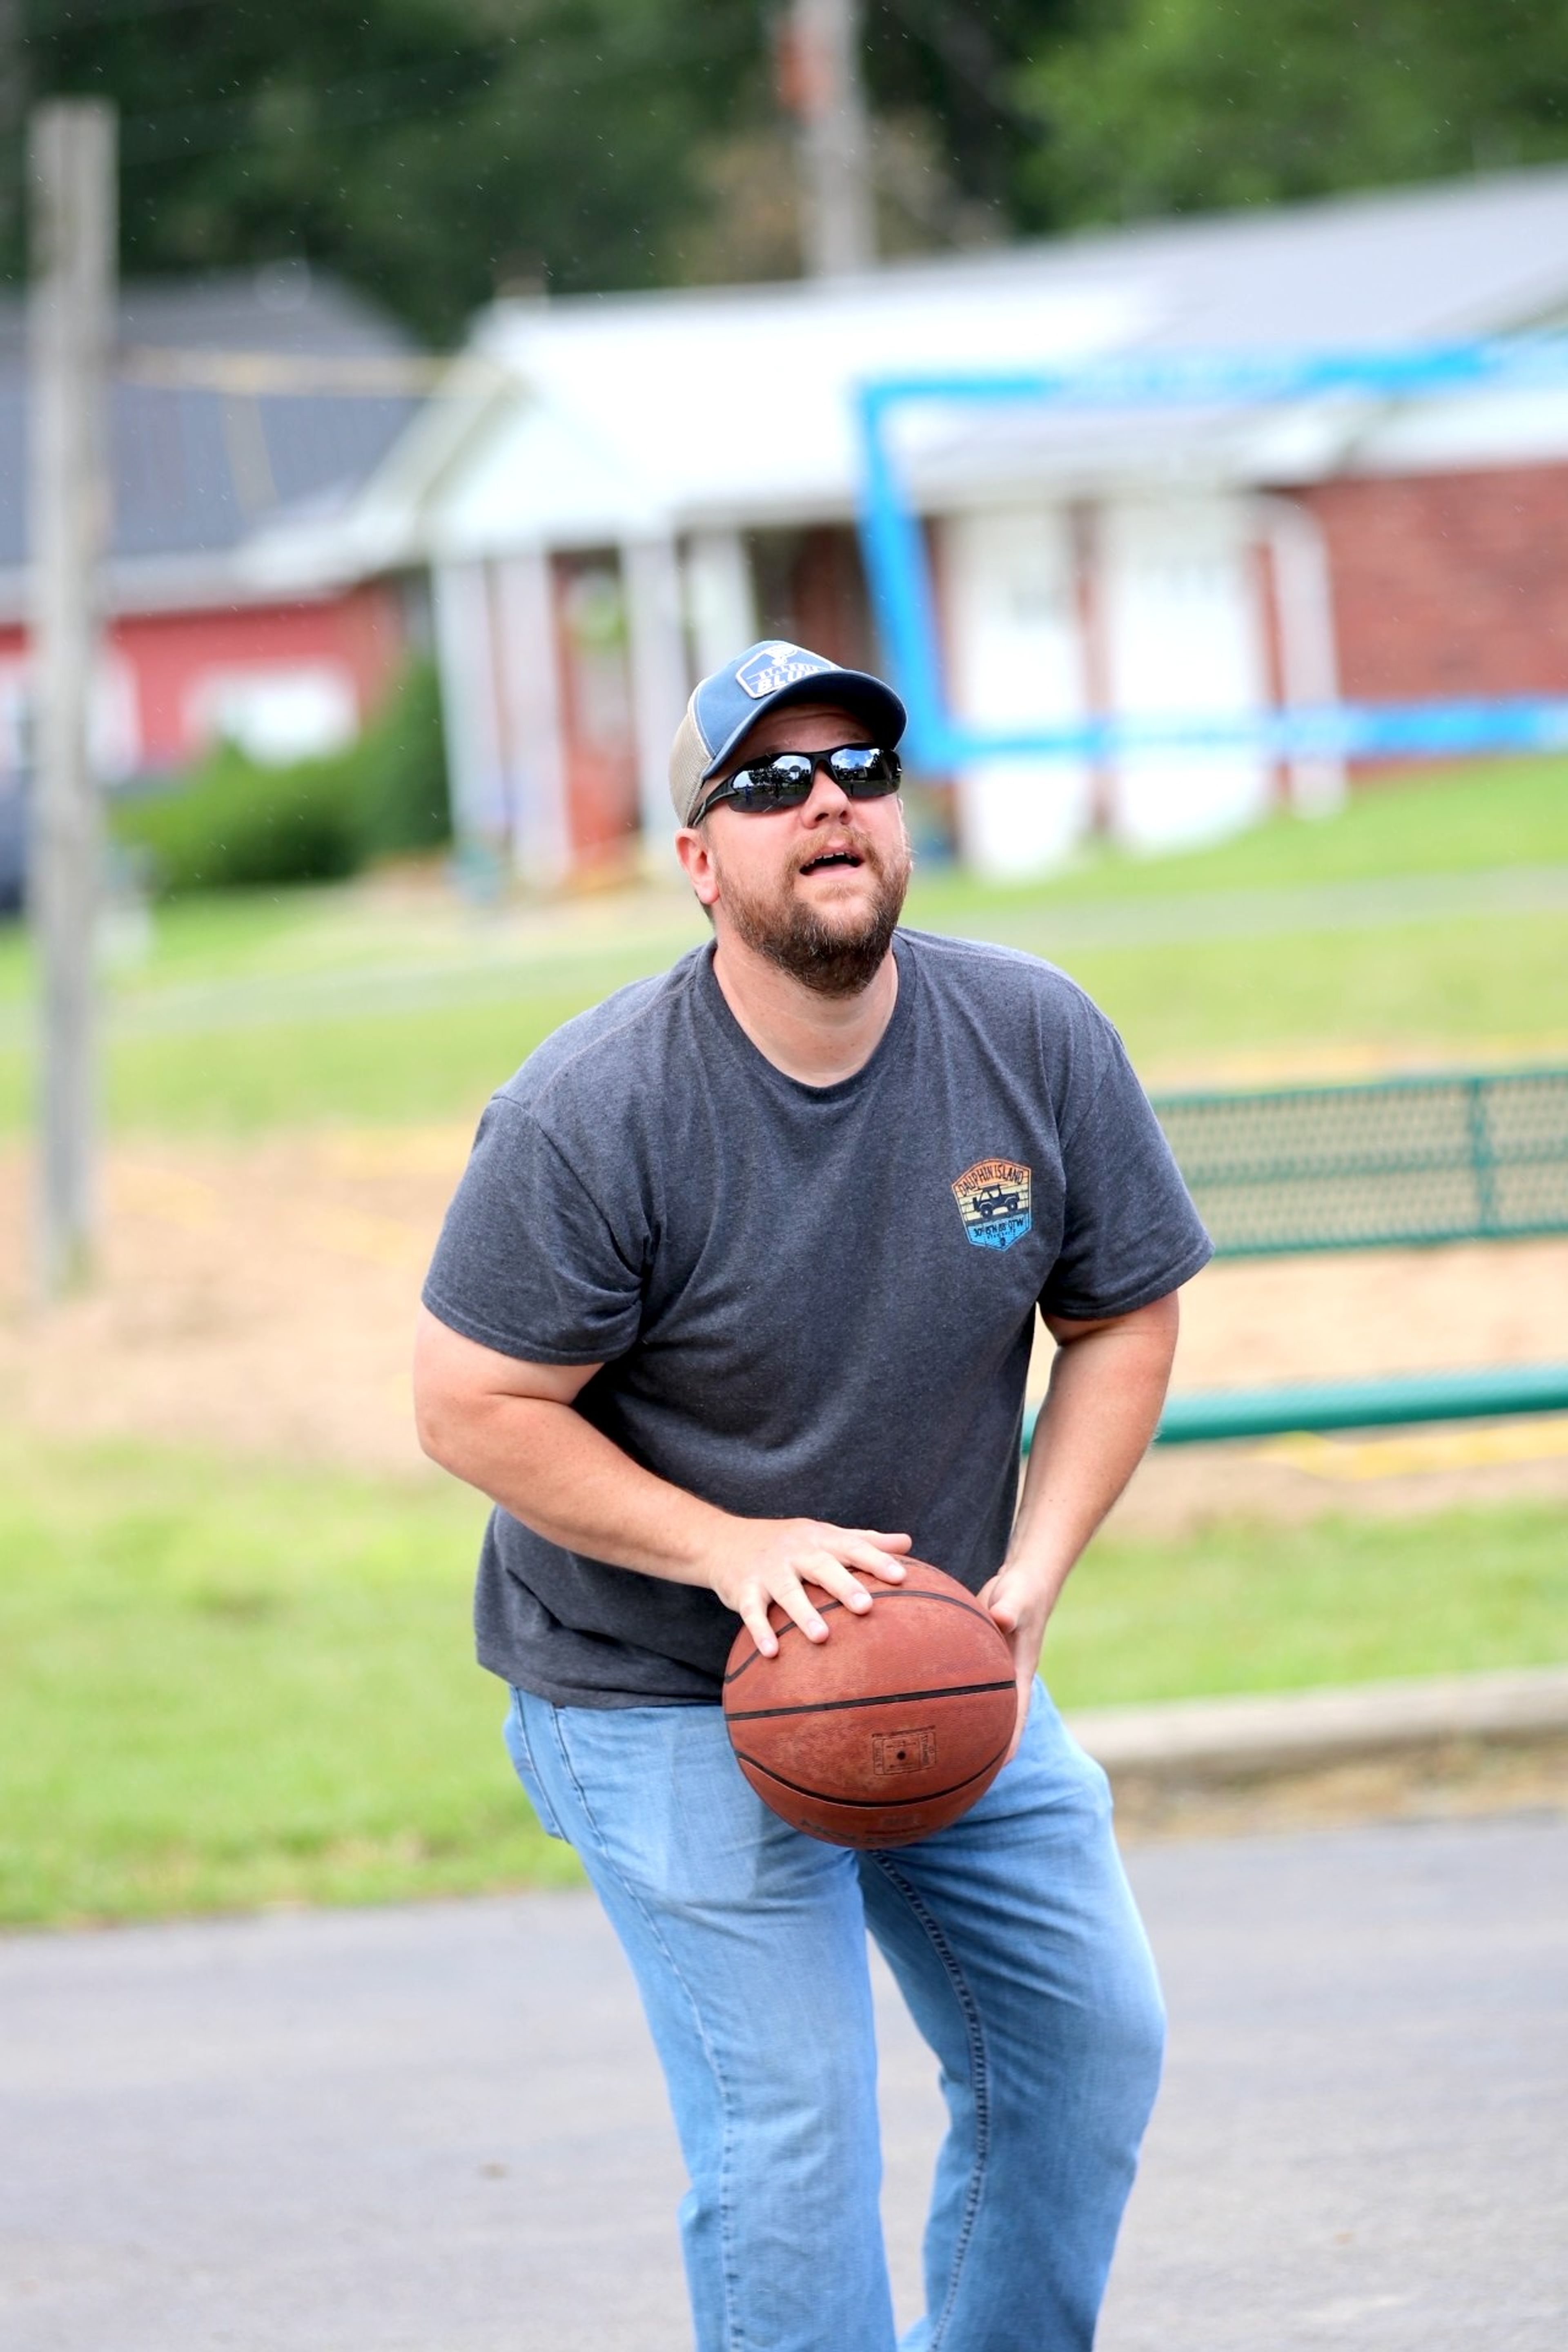 
Mark Deck attempts a free throw during the Iron Man competition. Other events included darts, corn hole and horseshoes, to name a few.